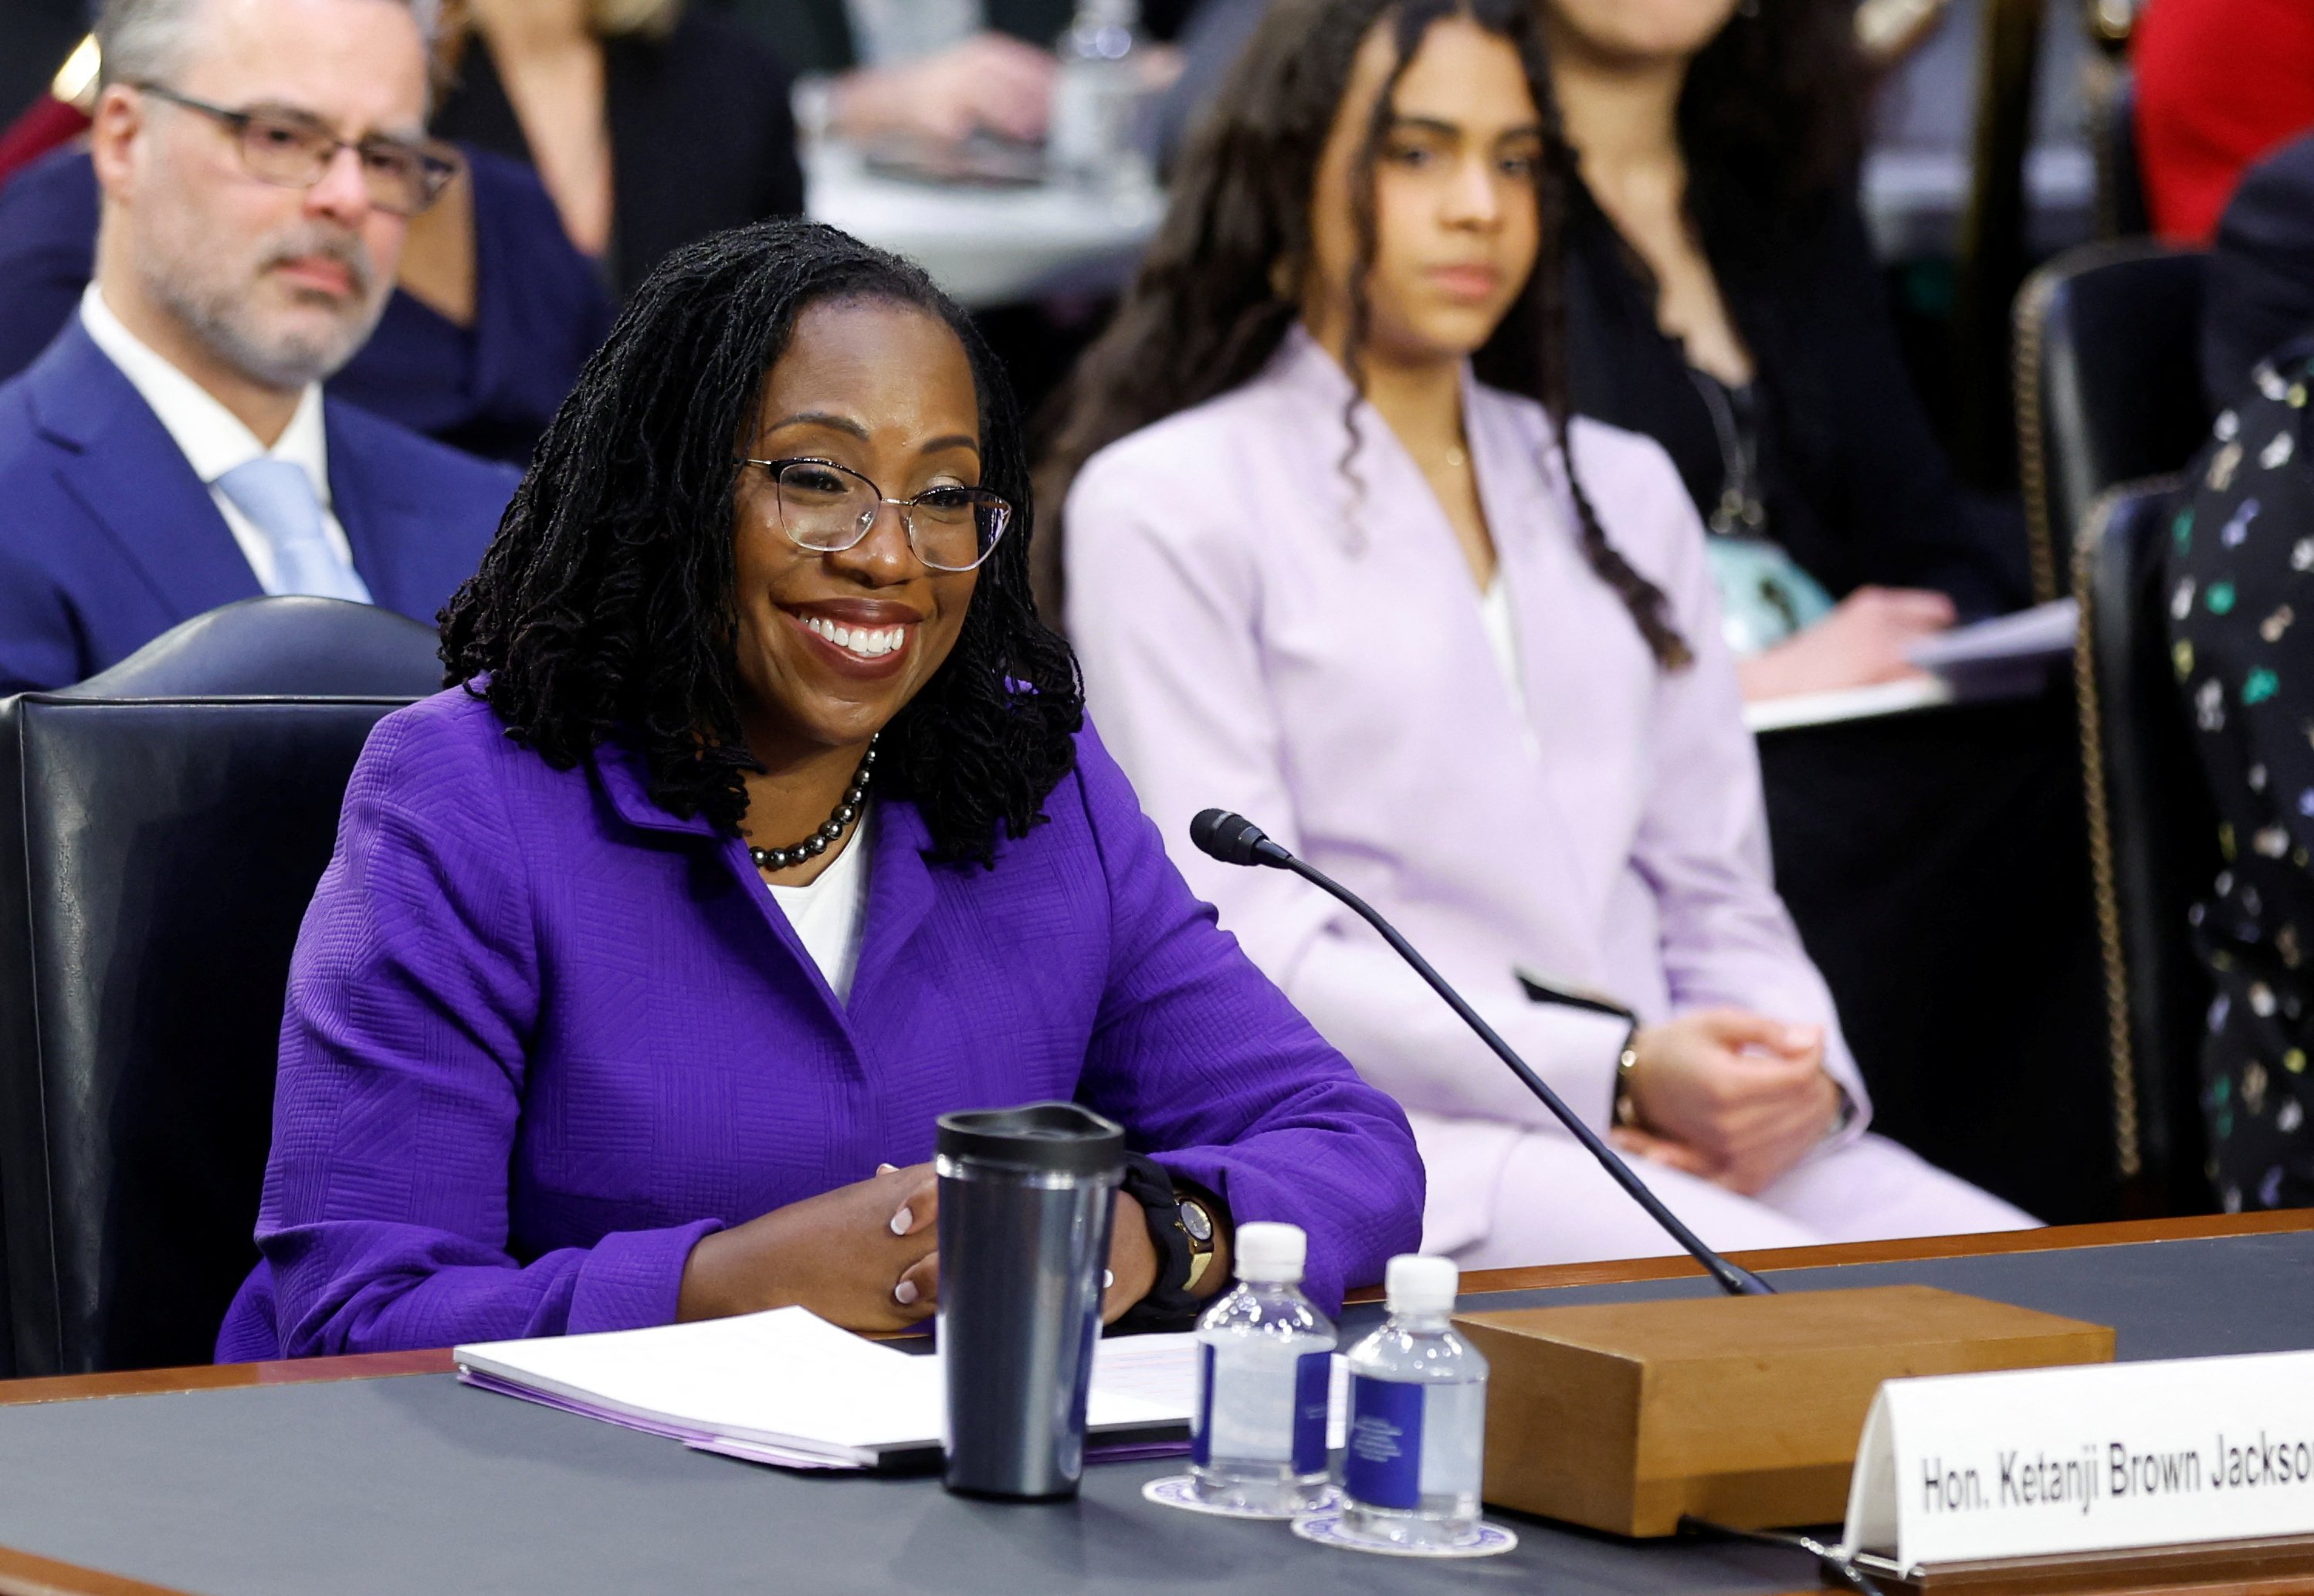 Supreme Court nominee Ketanji Brown Jackson, a federal appeals court judge, smiles as she listens to the start of the U.S. Senate Judiciary Committee confirmation hearing on her nomination to the U.S. Supreme Court on Capitol Hill in Washington March 21, 